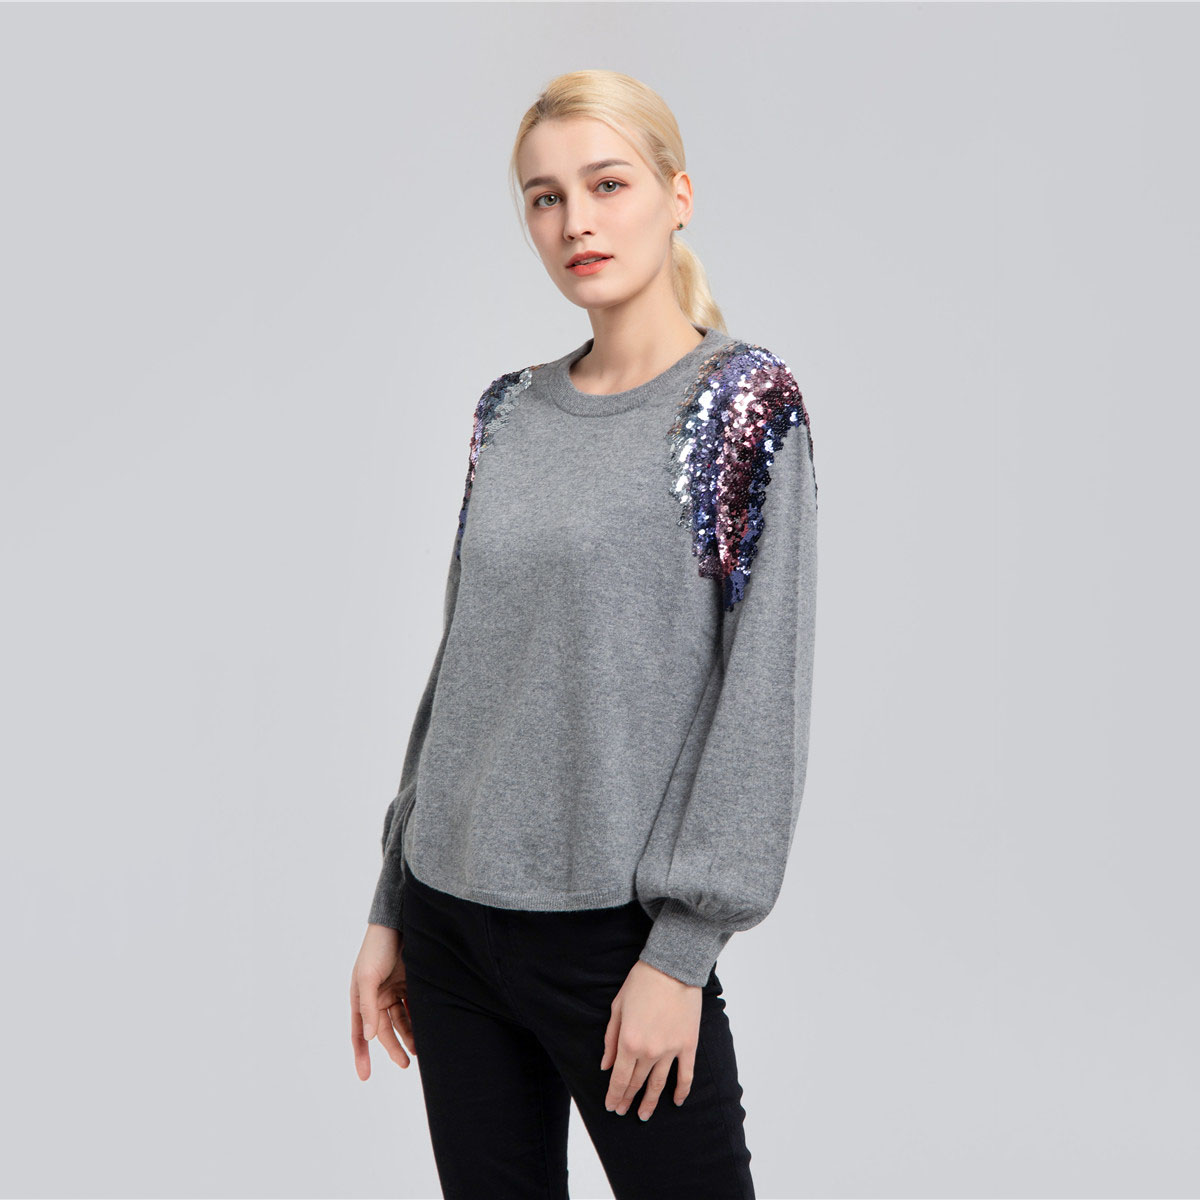 Round neck na sweater na may Sequin WYSE19206-B